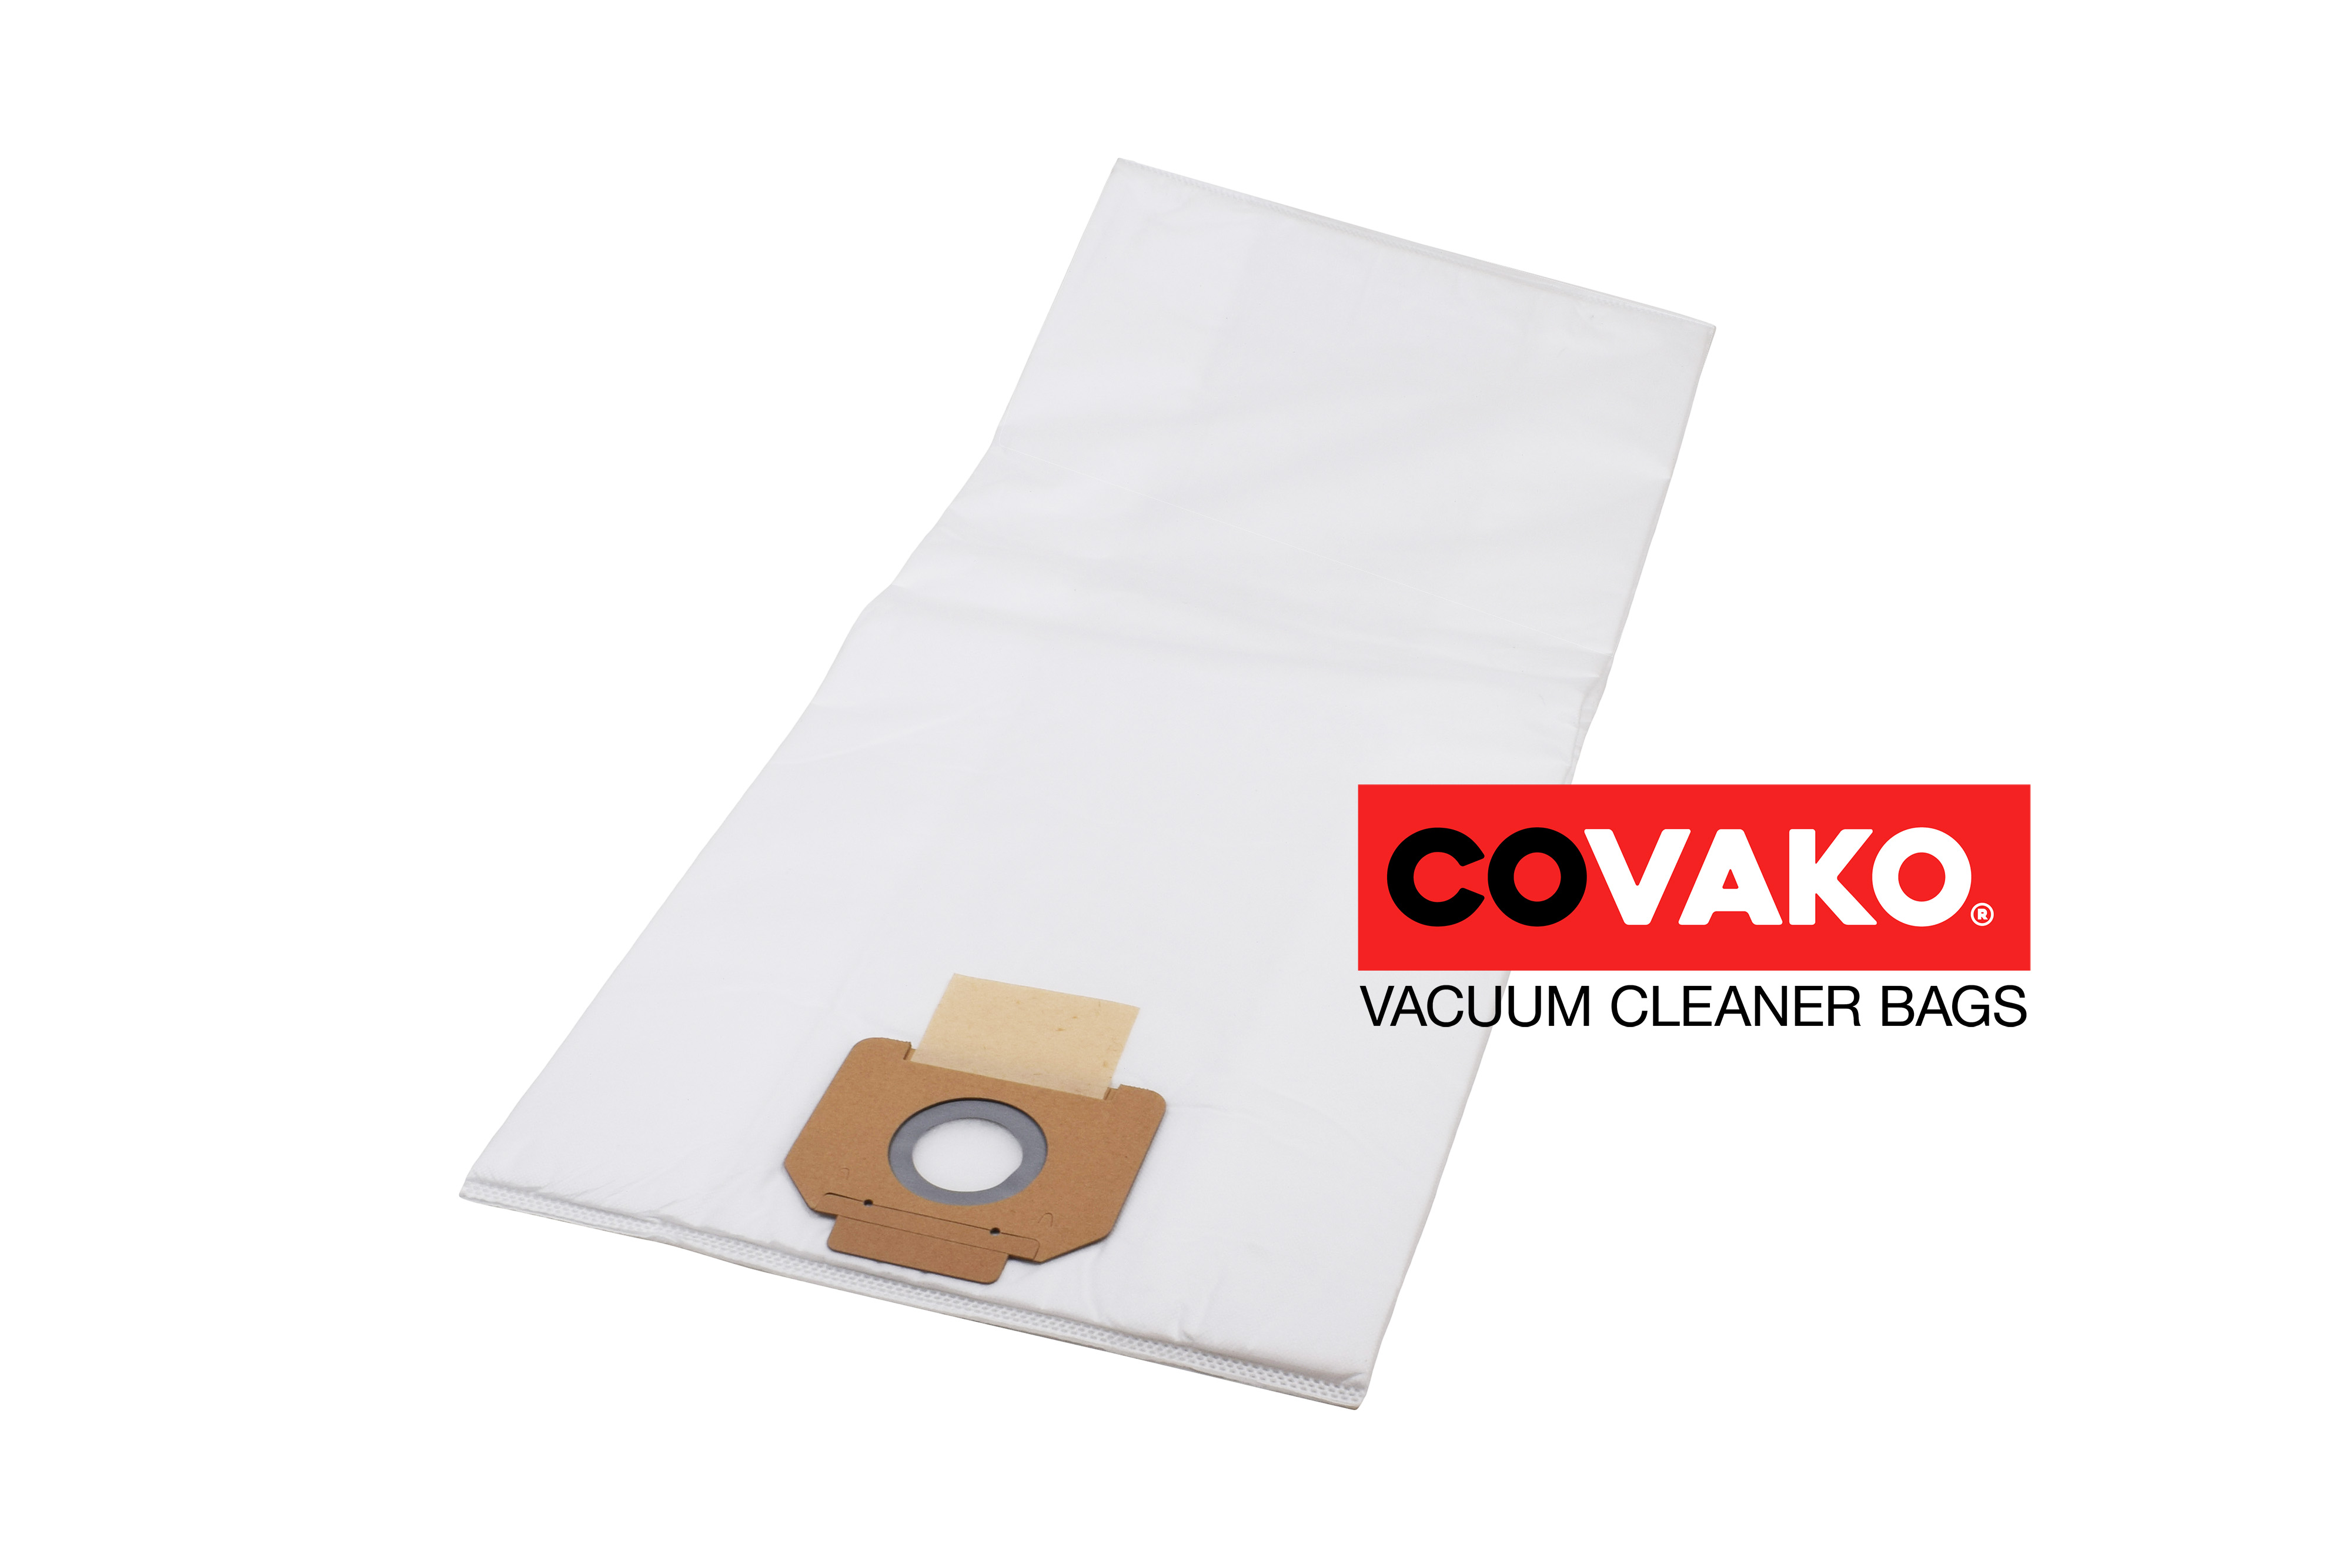 DiBo Windly 429 M IPC / Synthesis - DiBo vacuum cleaner bags